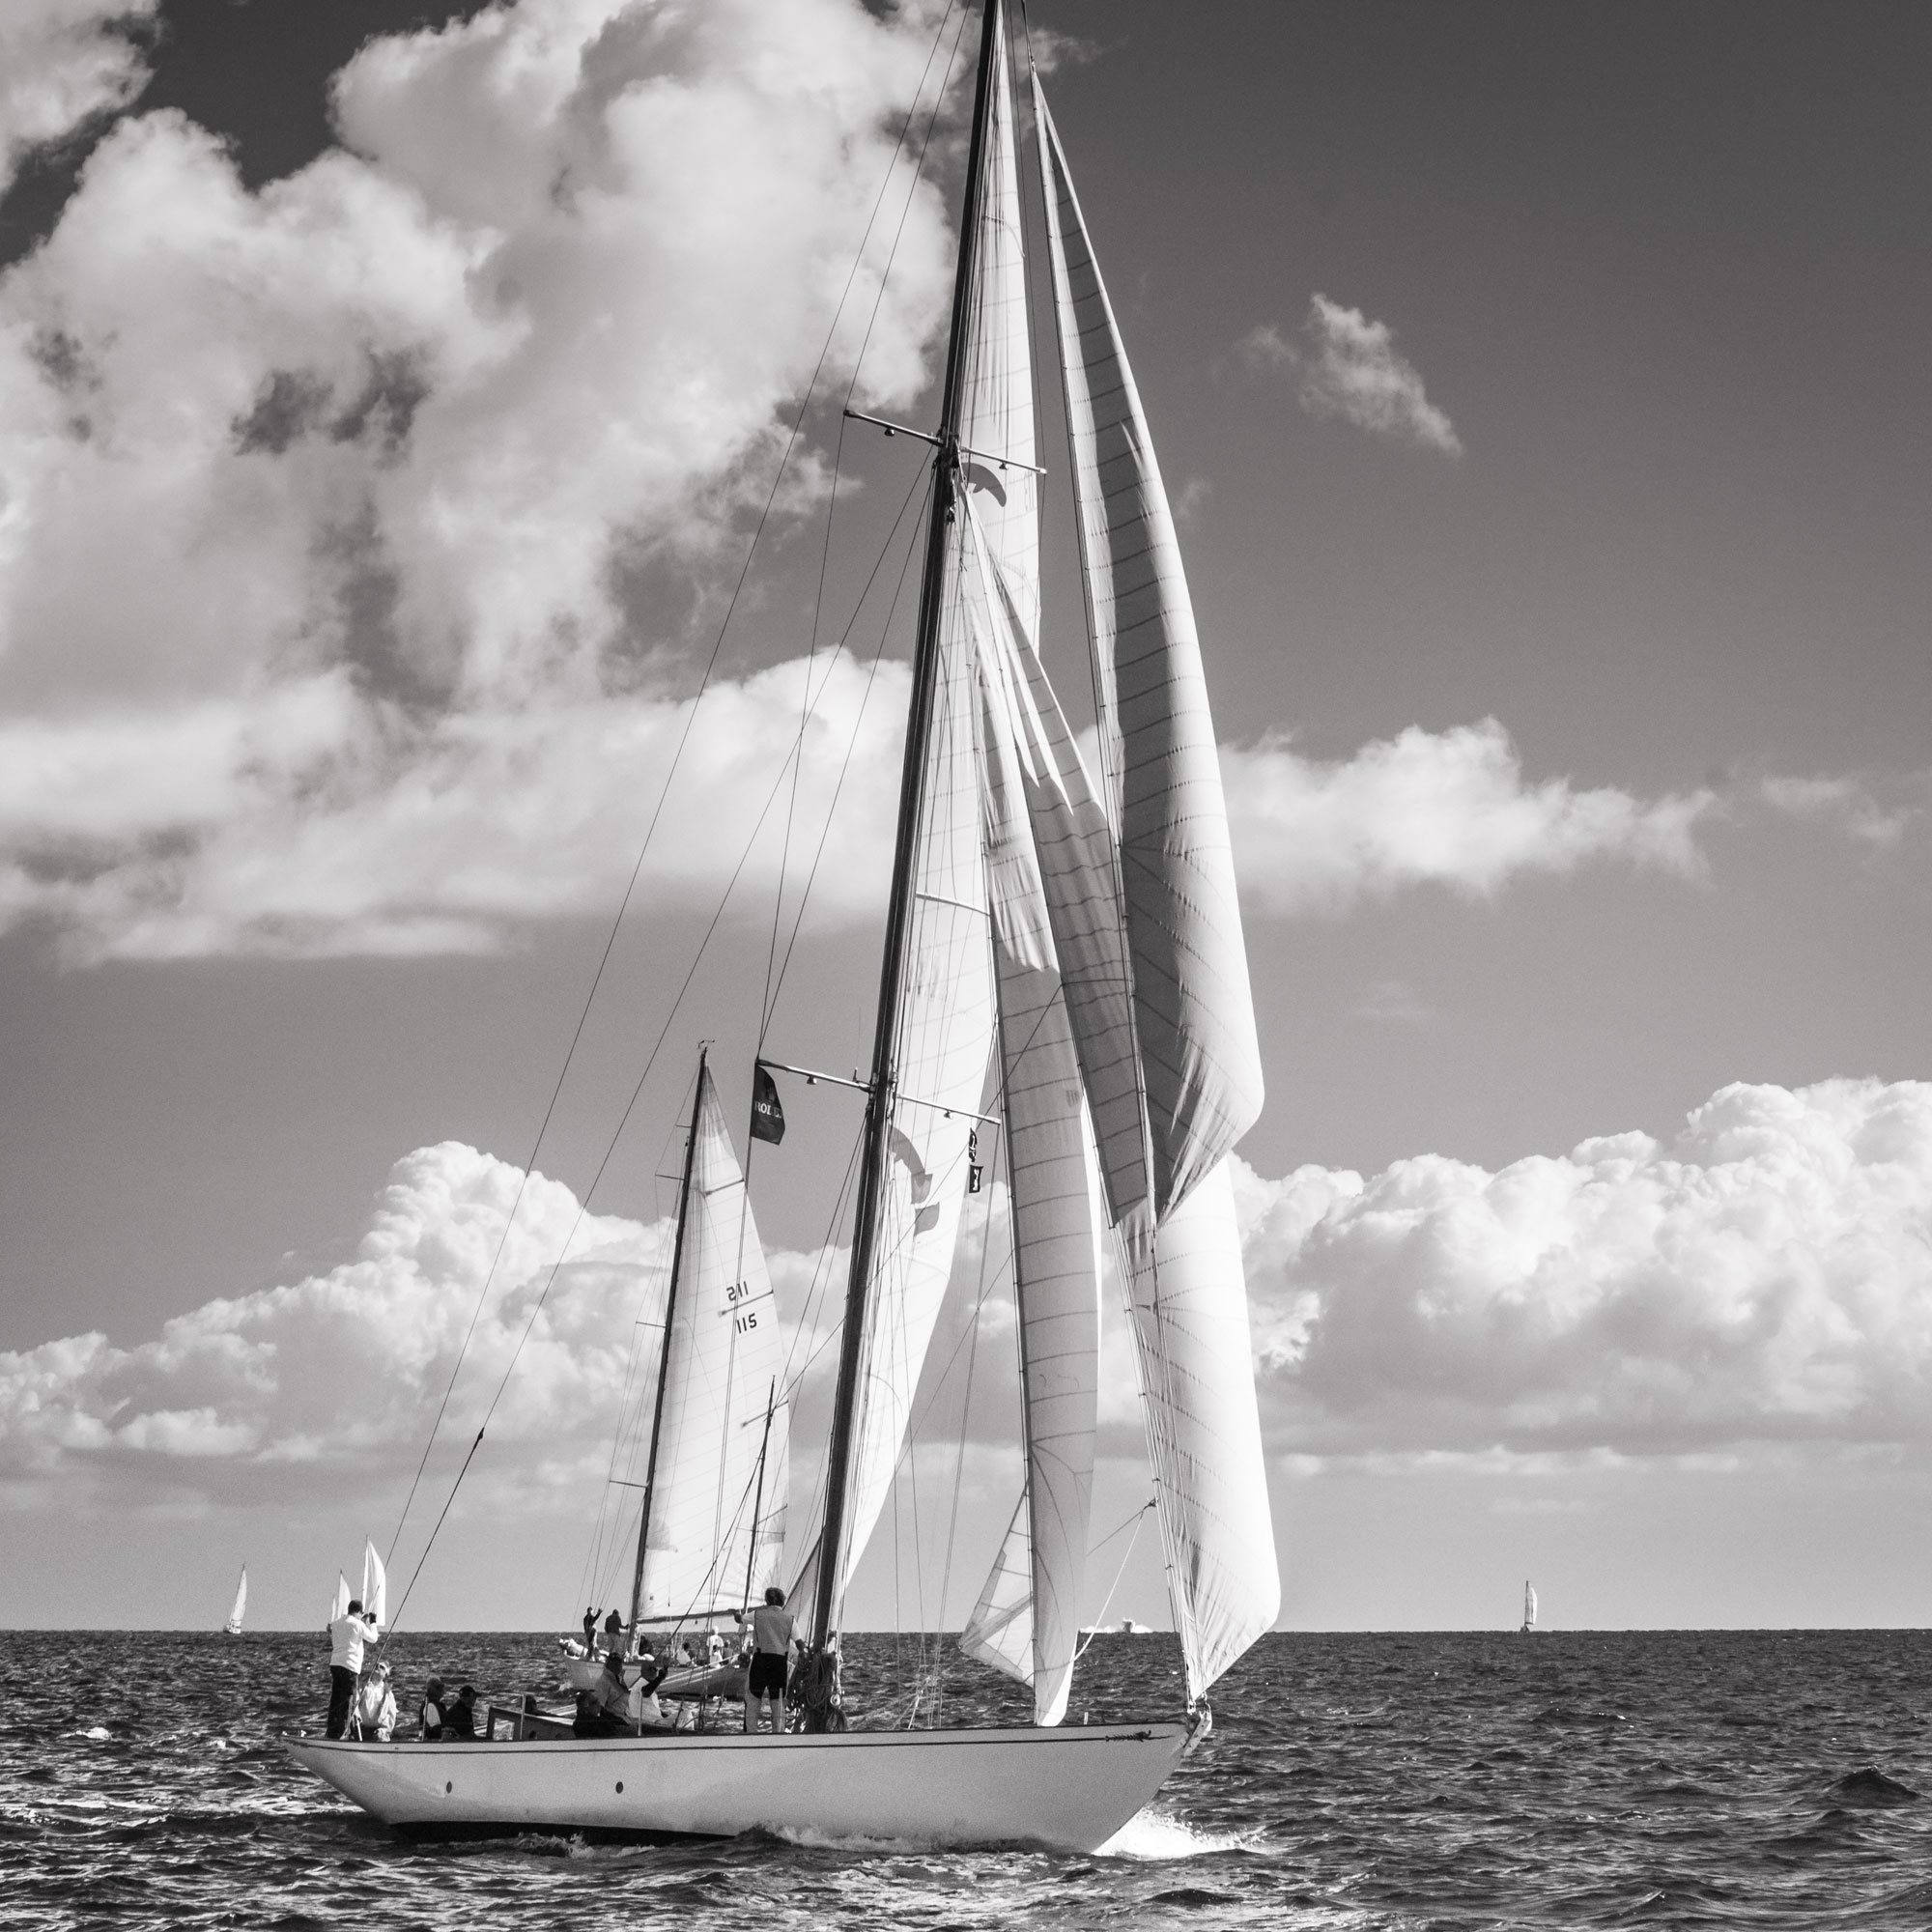 point of sail glass photo print Black and White image